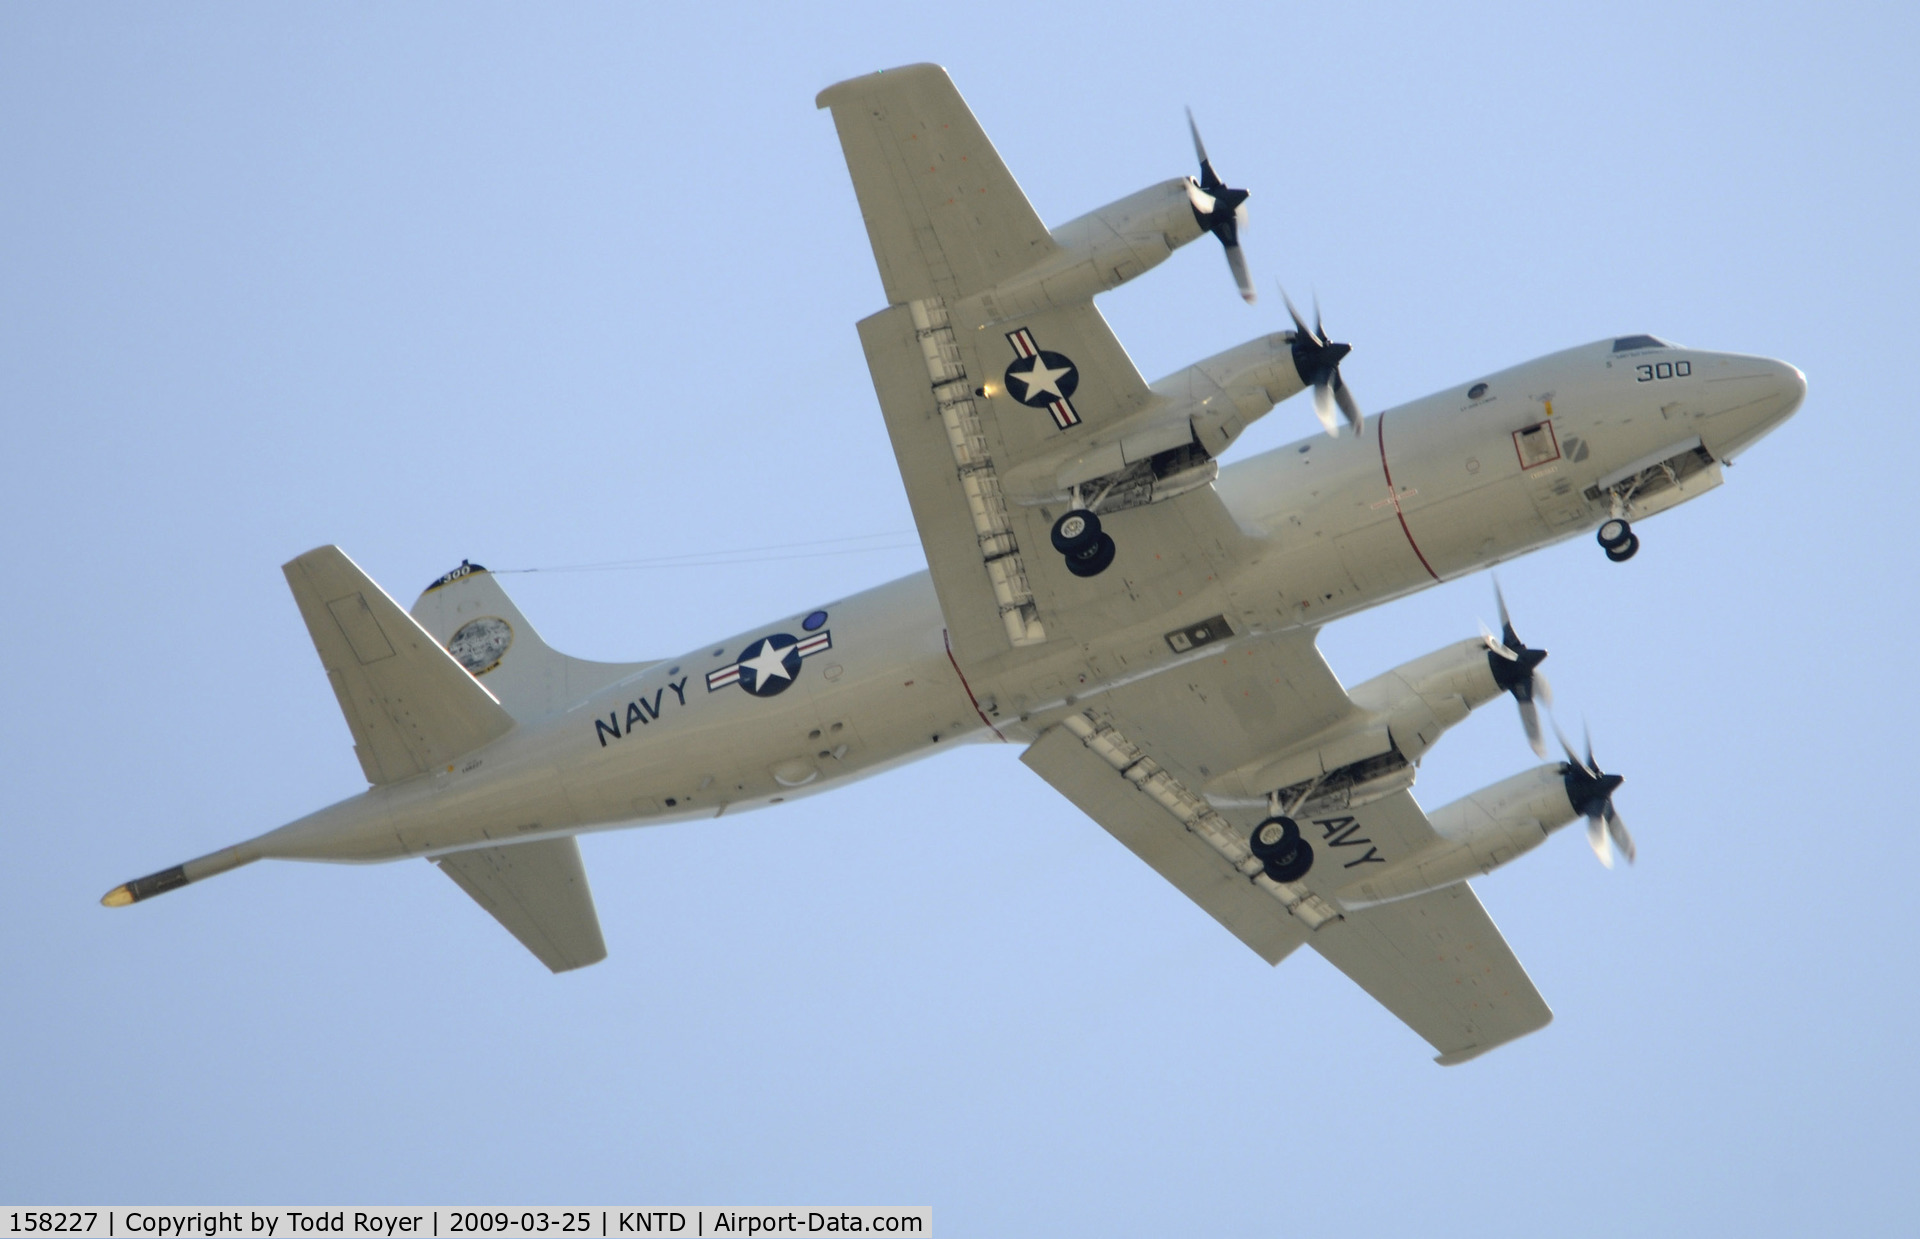 158227, 2000 Lockheed NP-3D Orion C/N 285A-5551, From the backyard